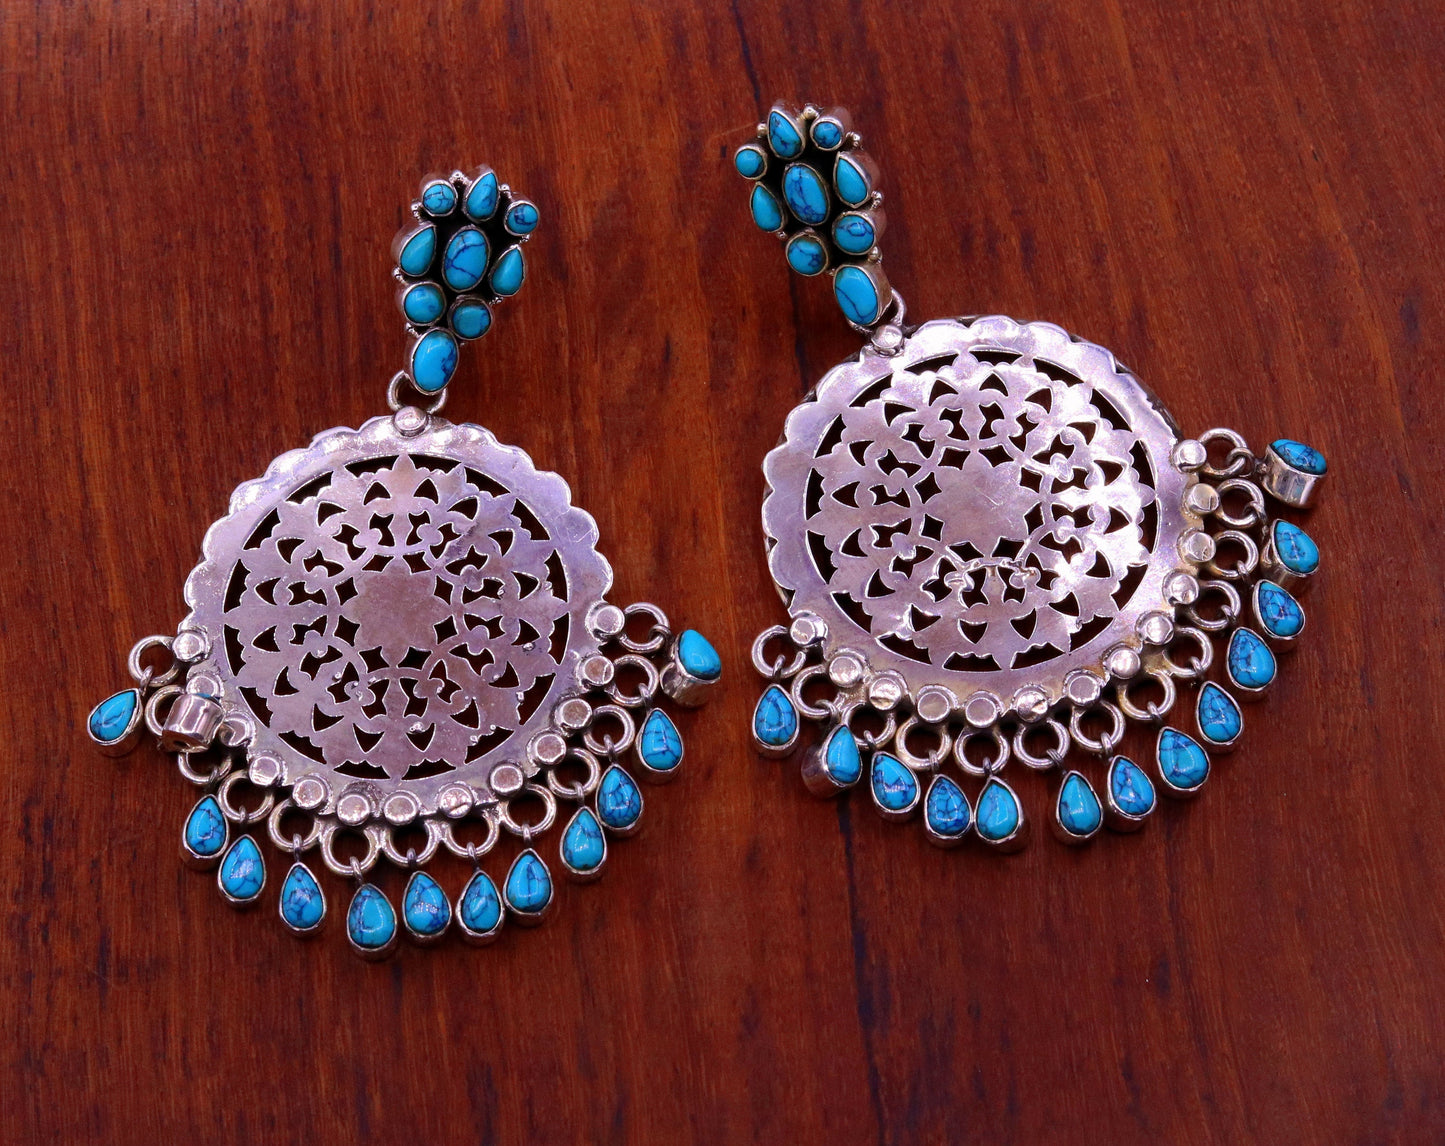 925 sterling silver handmade vintage design customized large stud earrings with turquoise stone hanging drops tribal jewelry from india s720 - TRIBAL ORNAMENTS